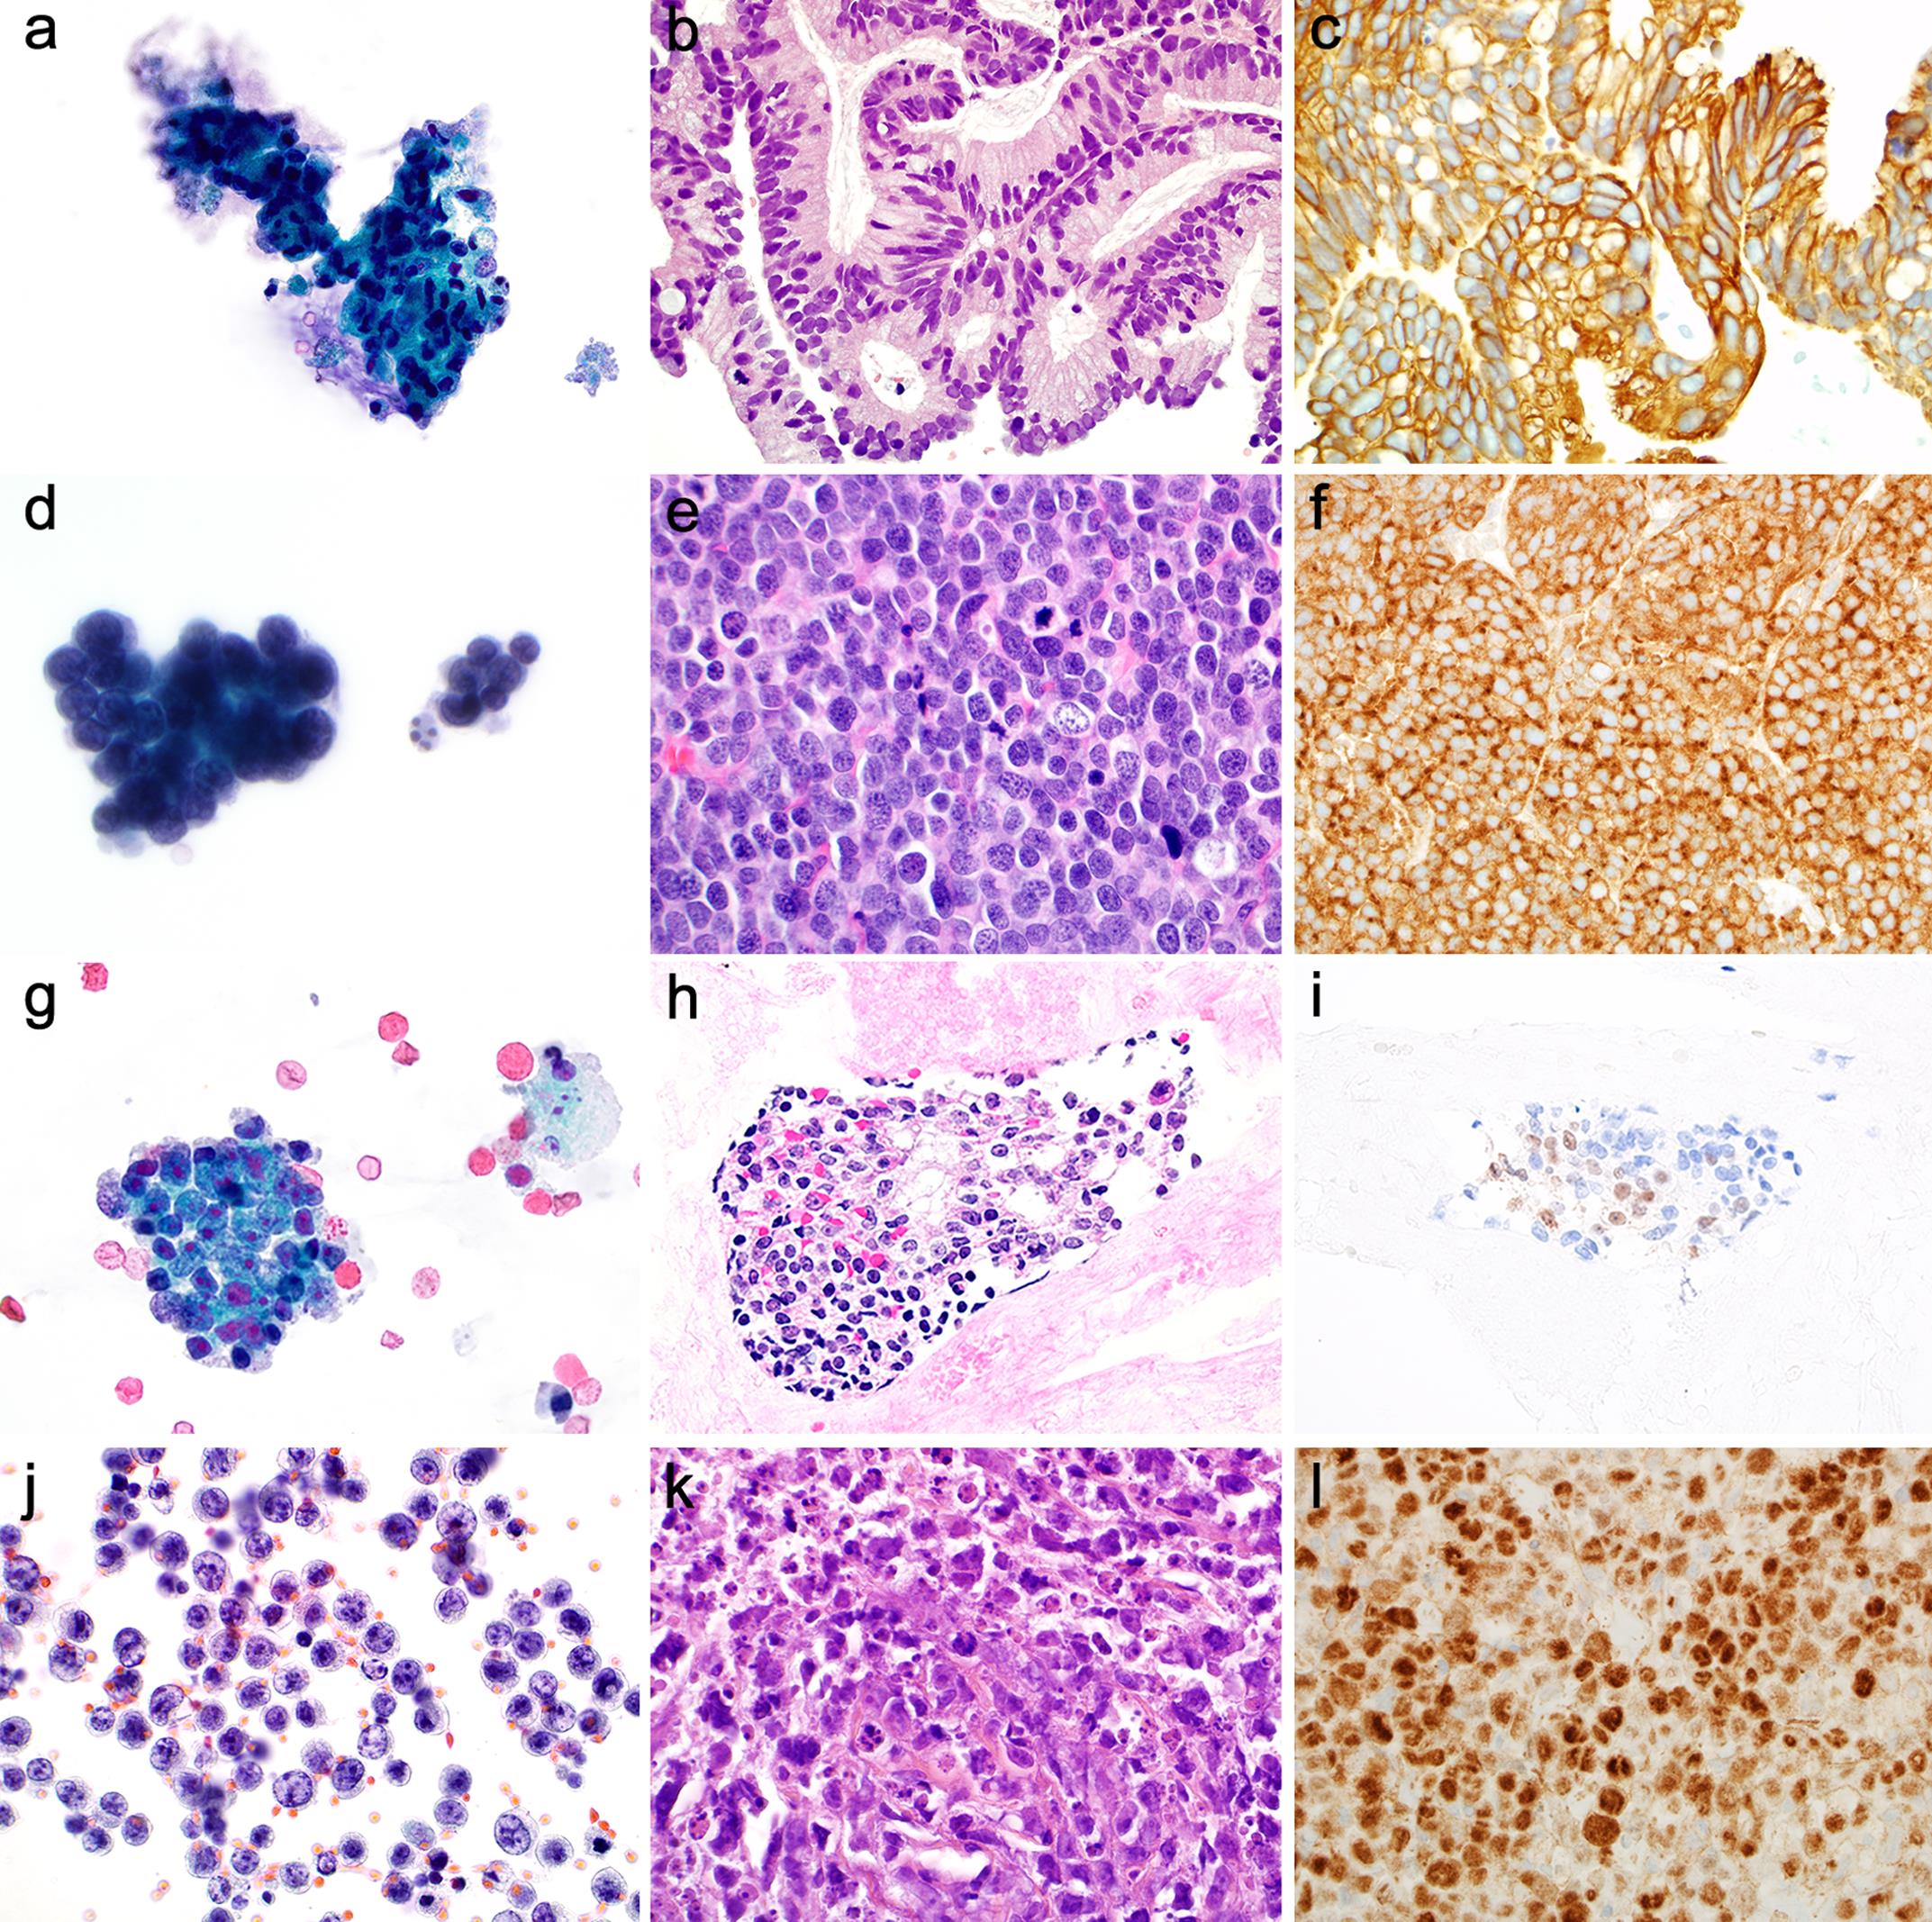 Other malignancies. Adenocarcinoma: Malignant columnar cells are arranged in glandular formation, with elongated hyperchromatic nuclei (a), and moderate vacuolated or delicate cytoplasm (b), and present with low N/C ratios. The follow-up surgical resection shows the adenocarcinoma, which is positive for CK7 and CK20 (c). Small cell carcinoma: the cohesive cluster of cells with hyperchromatic round/oval nuclei, nuclear molding, and scant cytoplasm (d and e). The tumor cells are positive for synaptophysin (f). Prostatic adenocarcinoma: the cohesive nest of epithelial cells with prominent nucleoli and granular cytoplasm (g, h); Tumor cells are positive for NKX3.1 (i). Diffuse large B-cell lymphoma (DLBL): Discohesive cells with coarse chromatin, prominent nucleoli, irregular nuclear membrane, and minimal cytoplasm (j and k). Tumor cells are positive for PAX-5 (l).